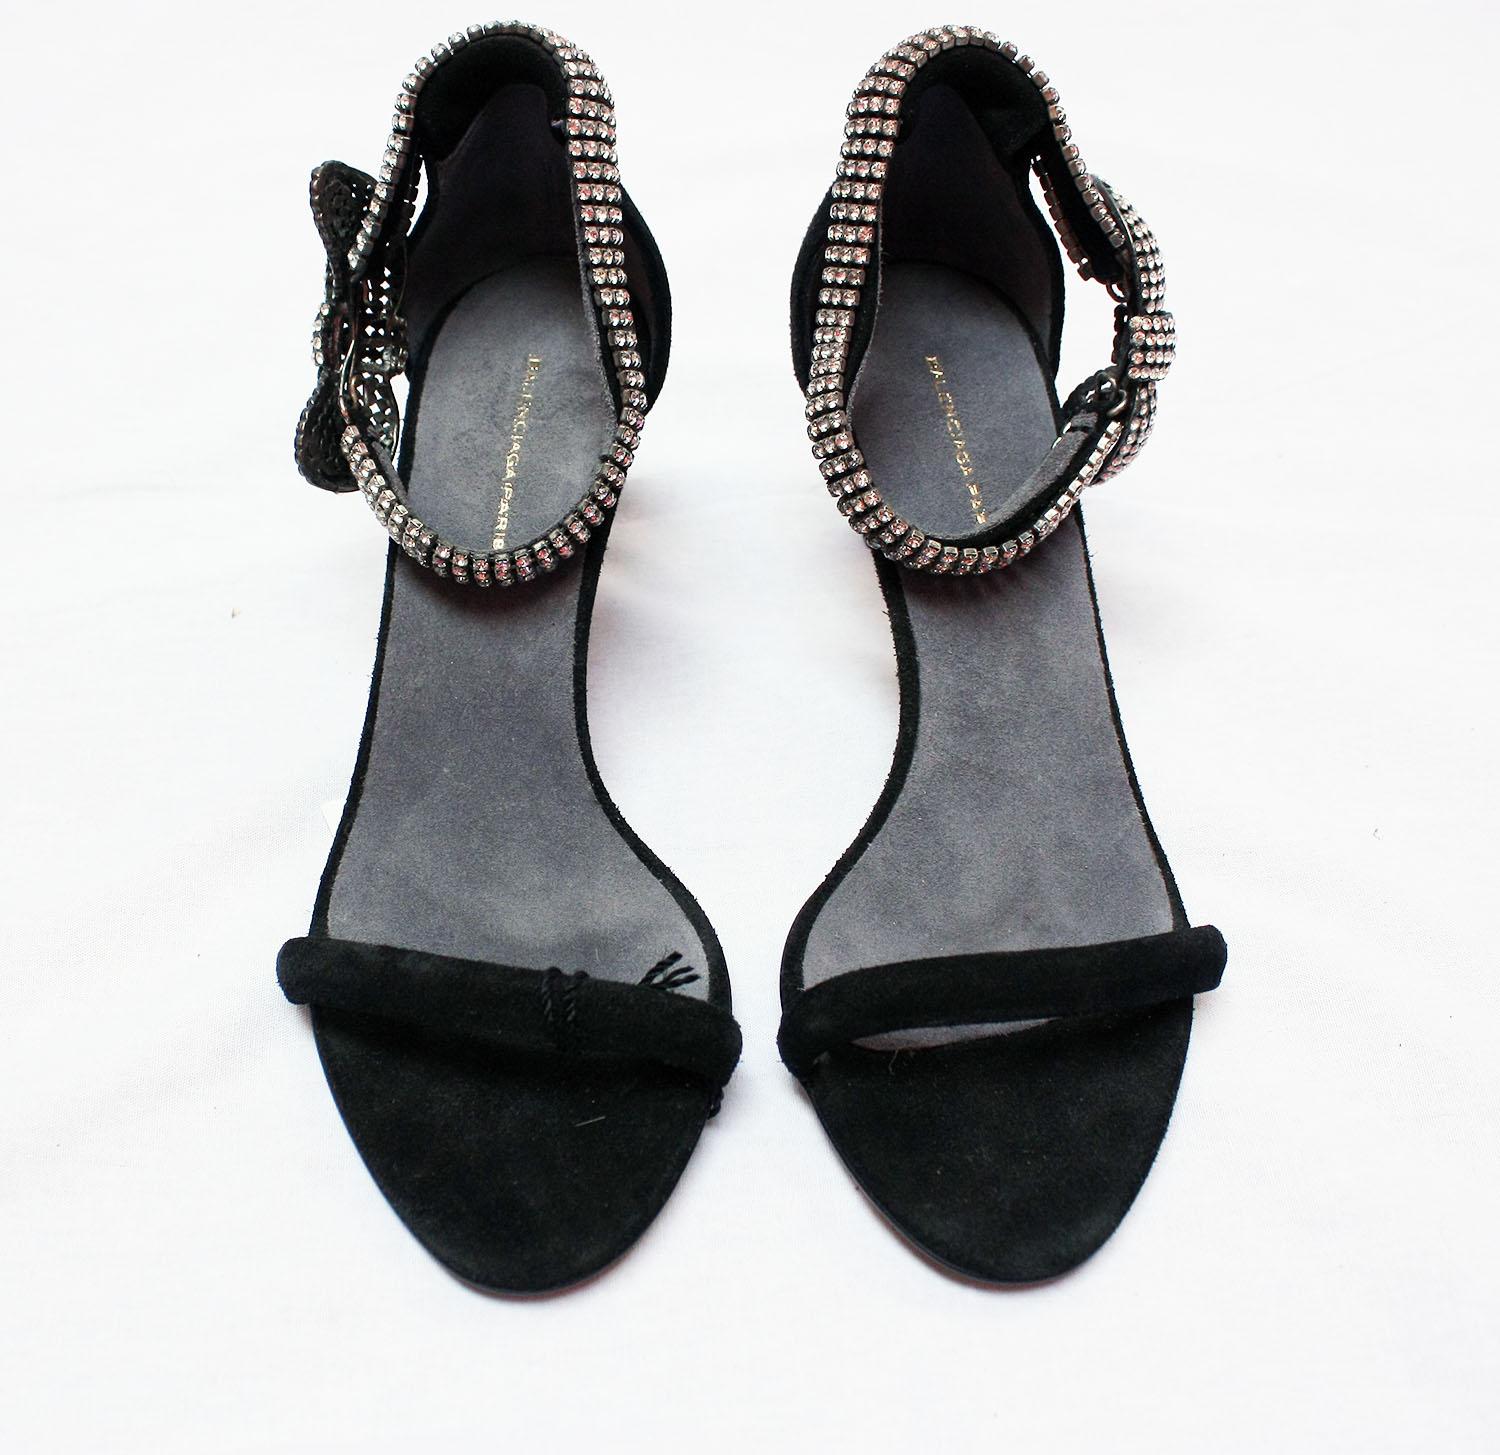 Balenciaga Black Kitten Heel with Crystal Ankle Strap Size 36 
These are the perfect heel for the holiday season. 
Black suede and the ankle strap has a crystal bow! 
Comfortable height. 